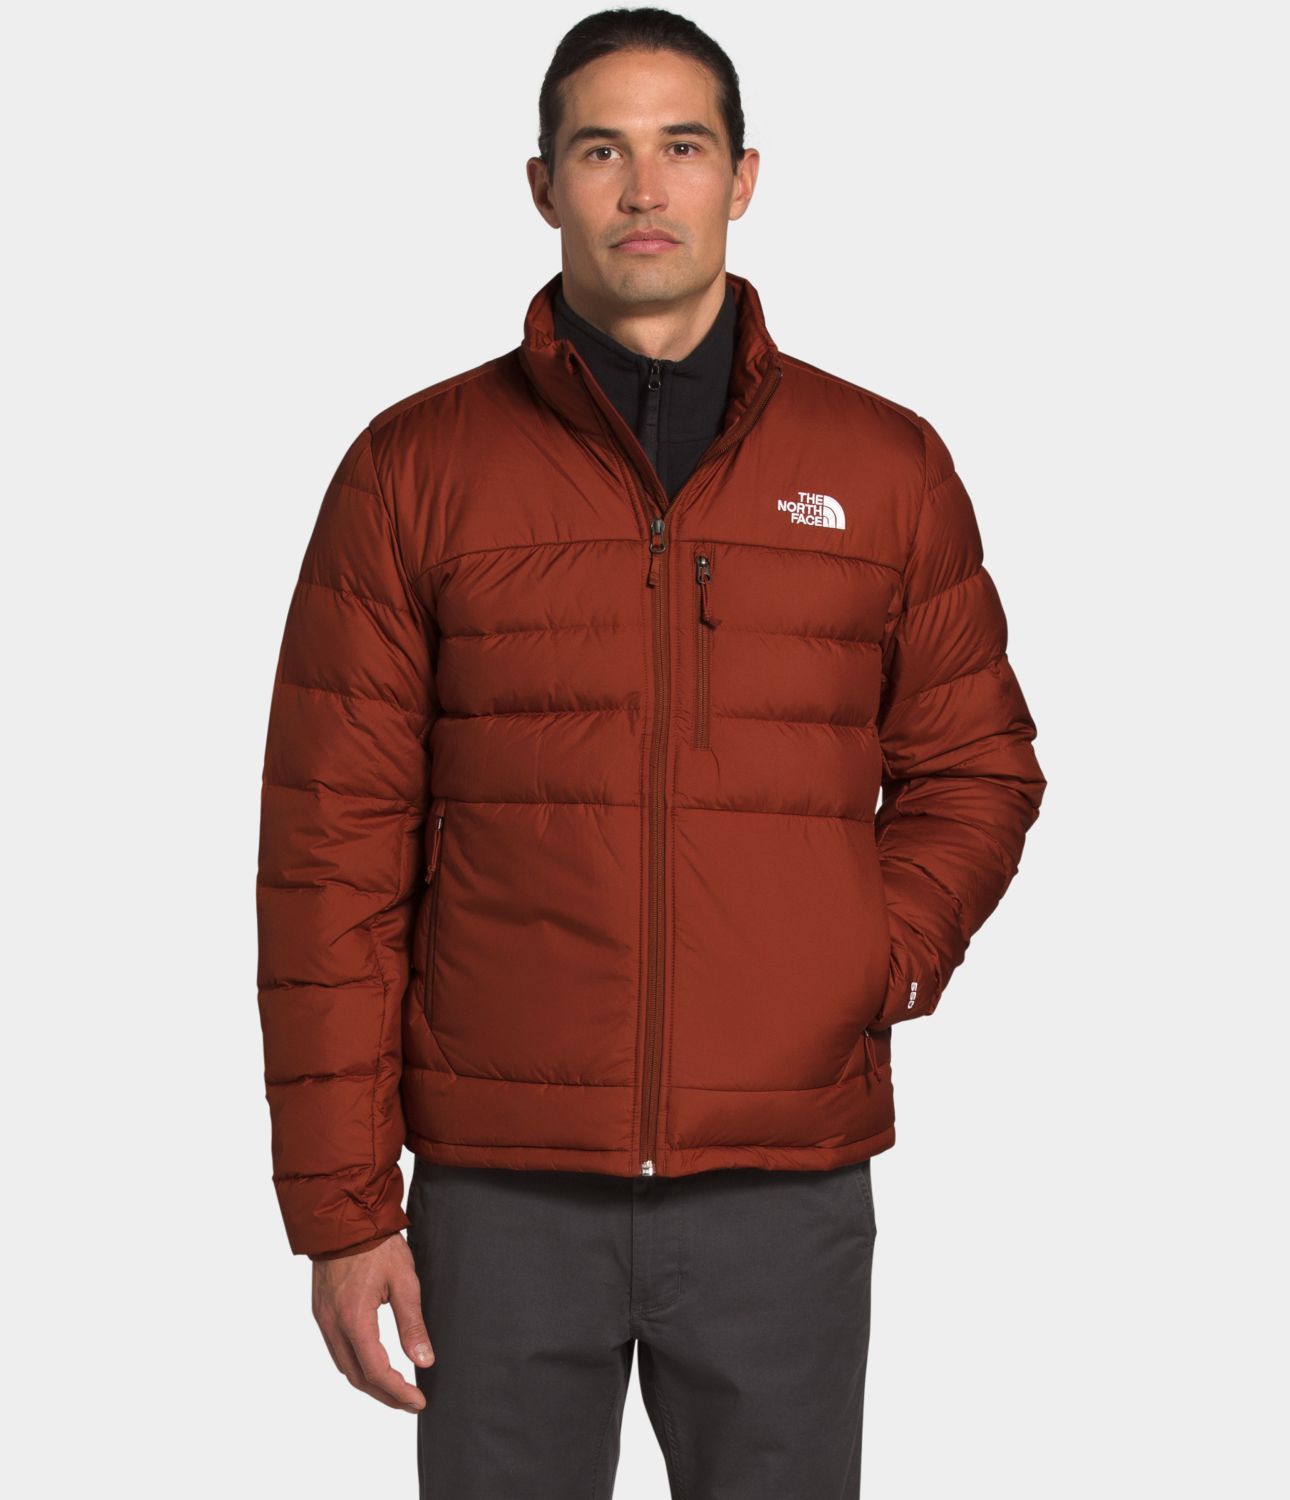 north face jacket cyber monday deal